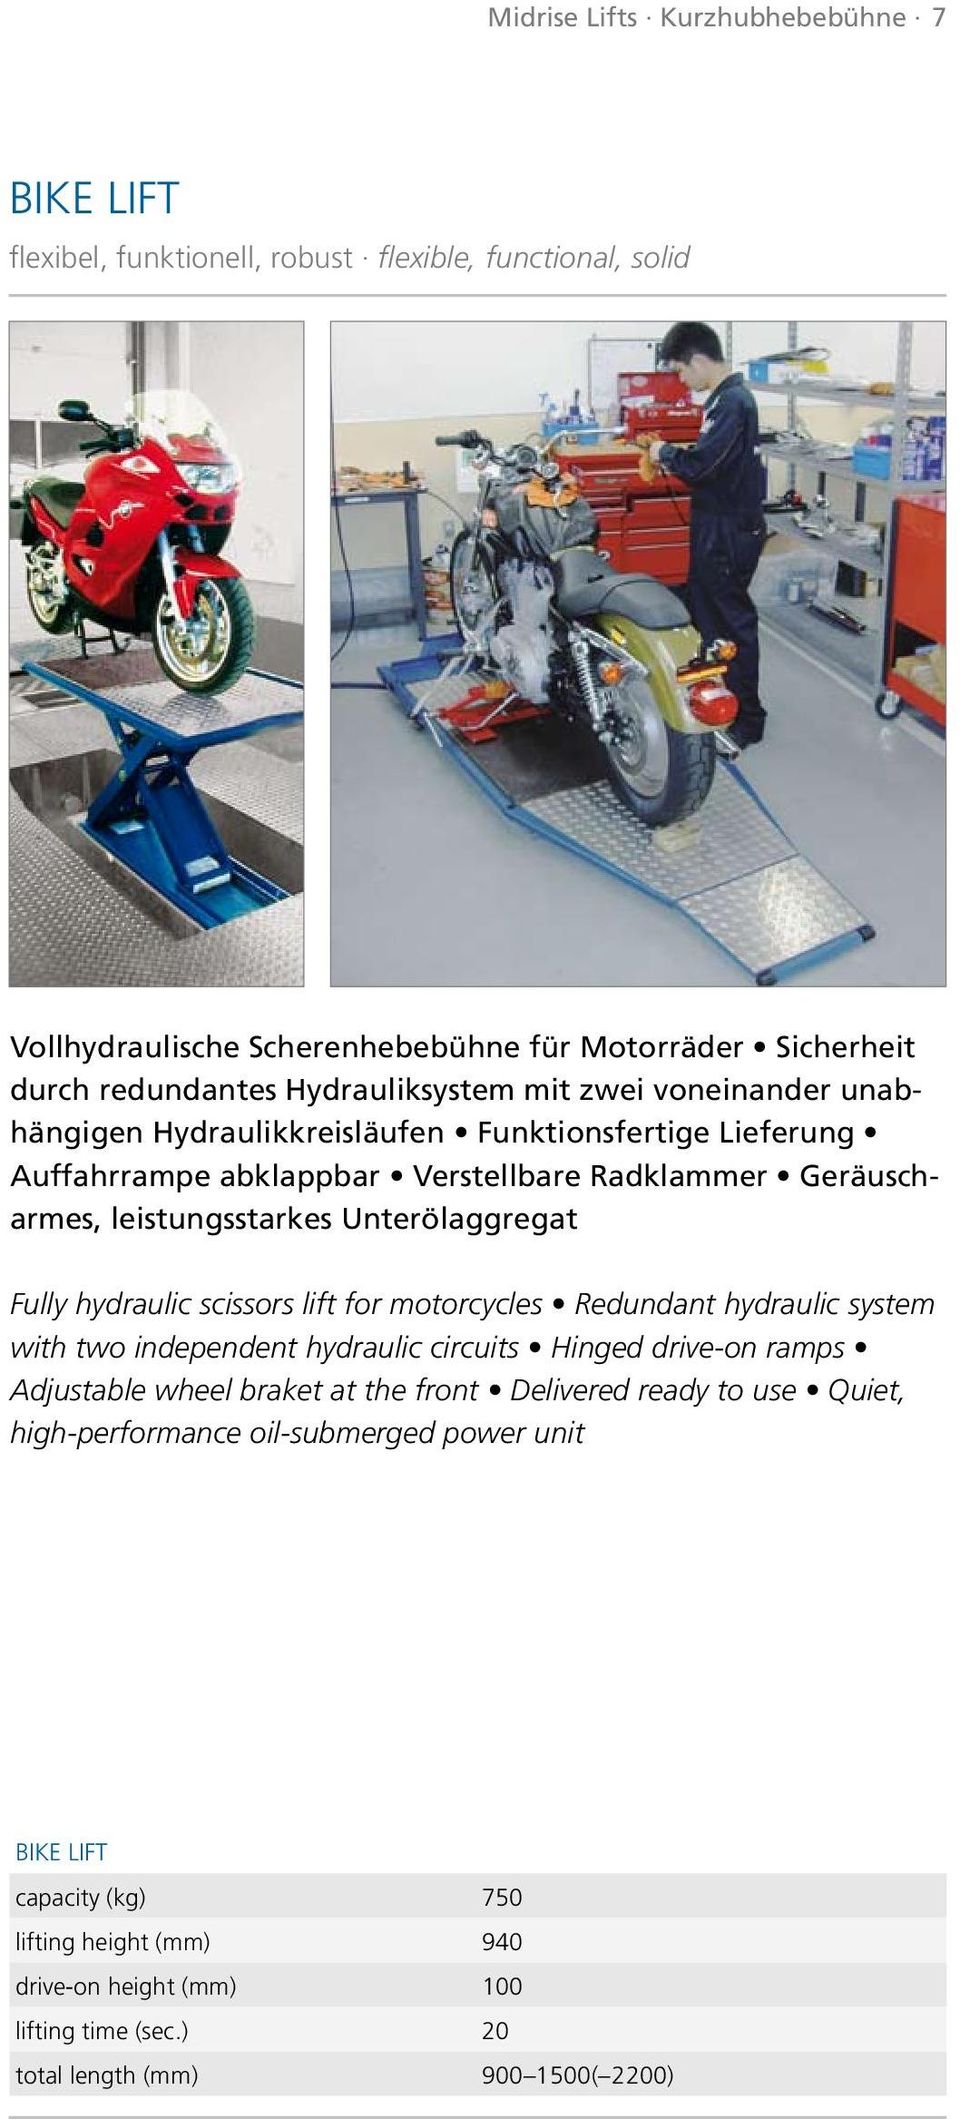 Unterölaggregat Fully hydraulic scissors lift for motorcycles Redundant hydraulic system with two independent hydraulic circuits Hinged drive-on ramps Adjustable wheel braket at the front